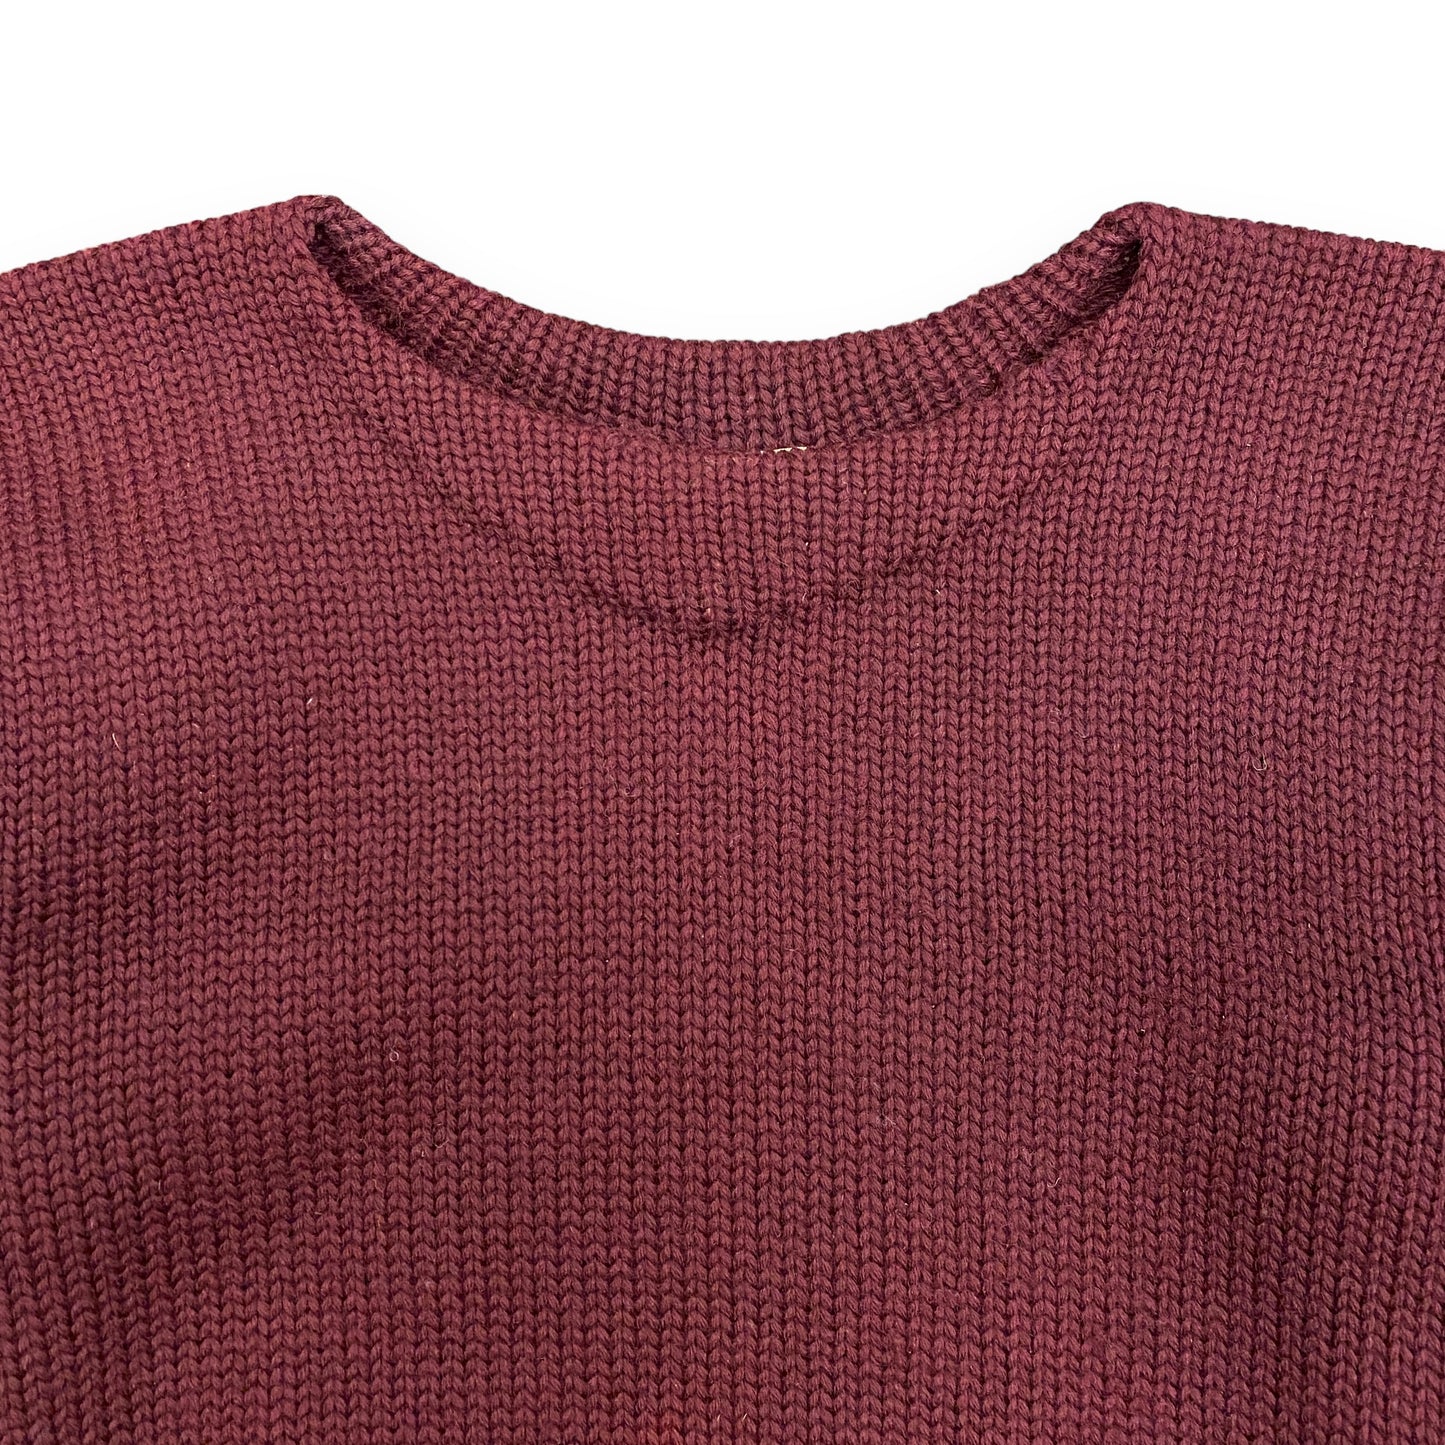 1940s Gordon (Brown Durrell Co.)  Pure Wool Maroon Sweater - Size Large